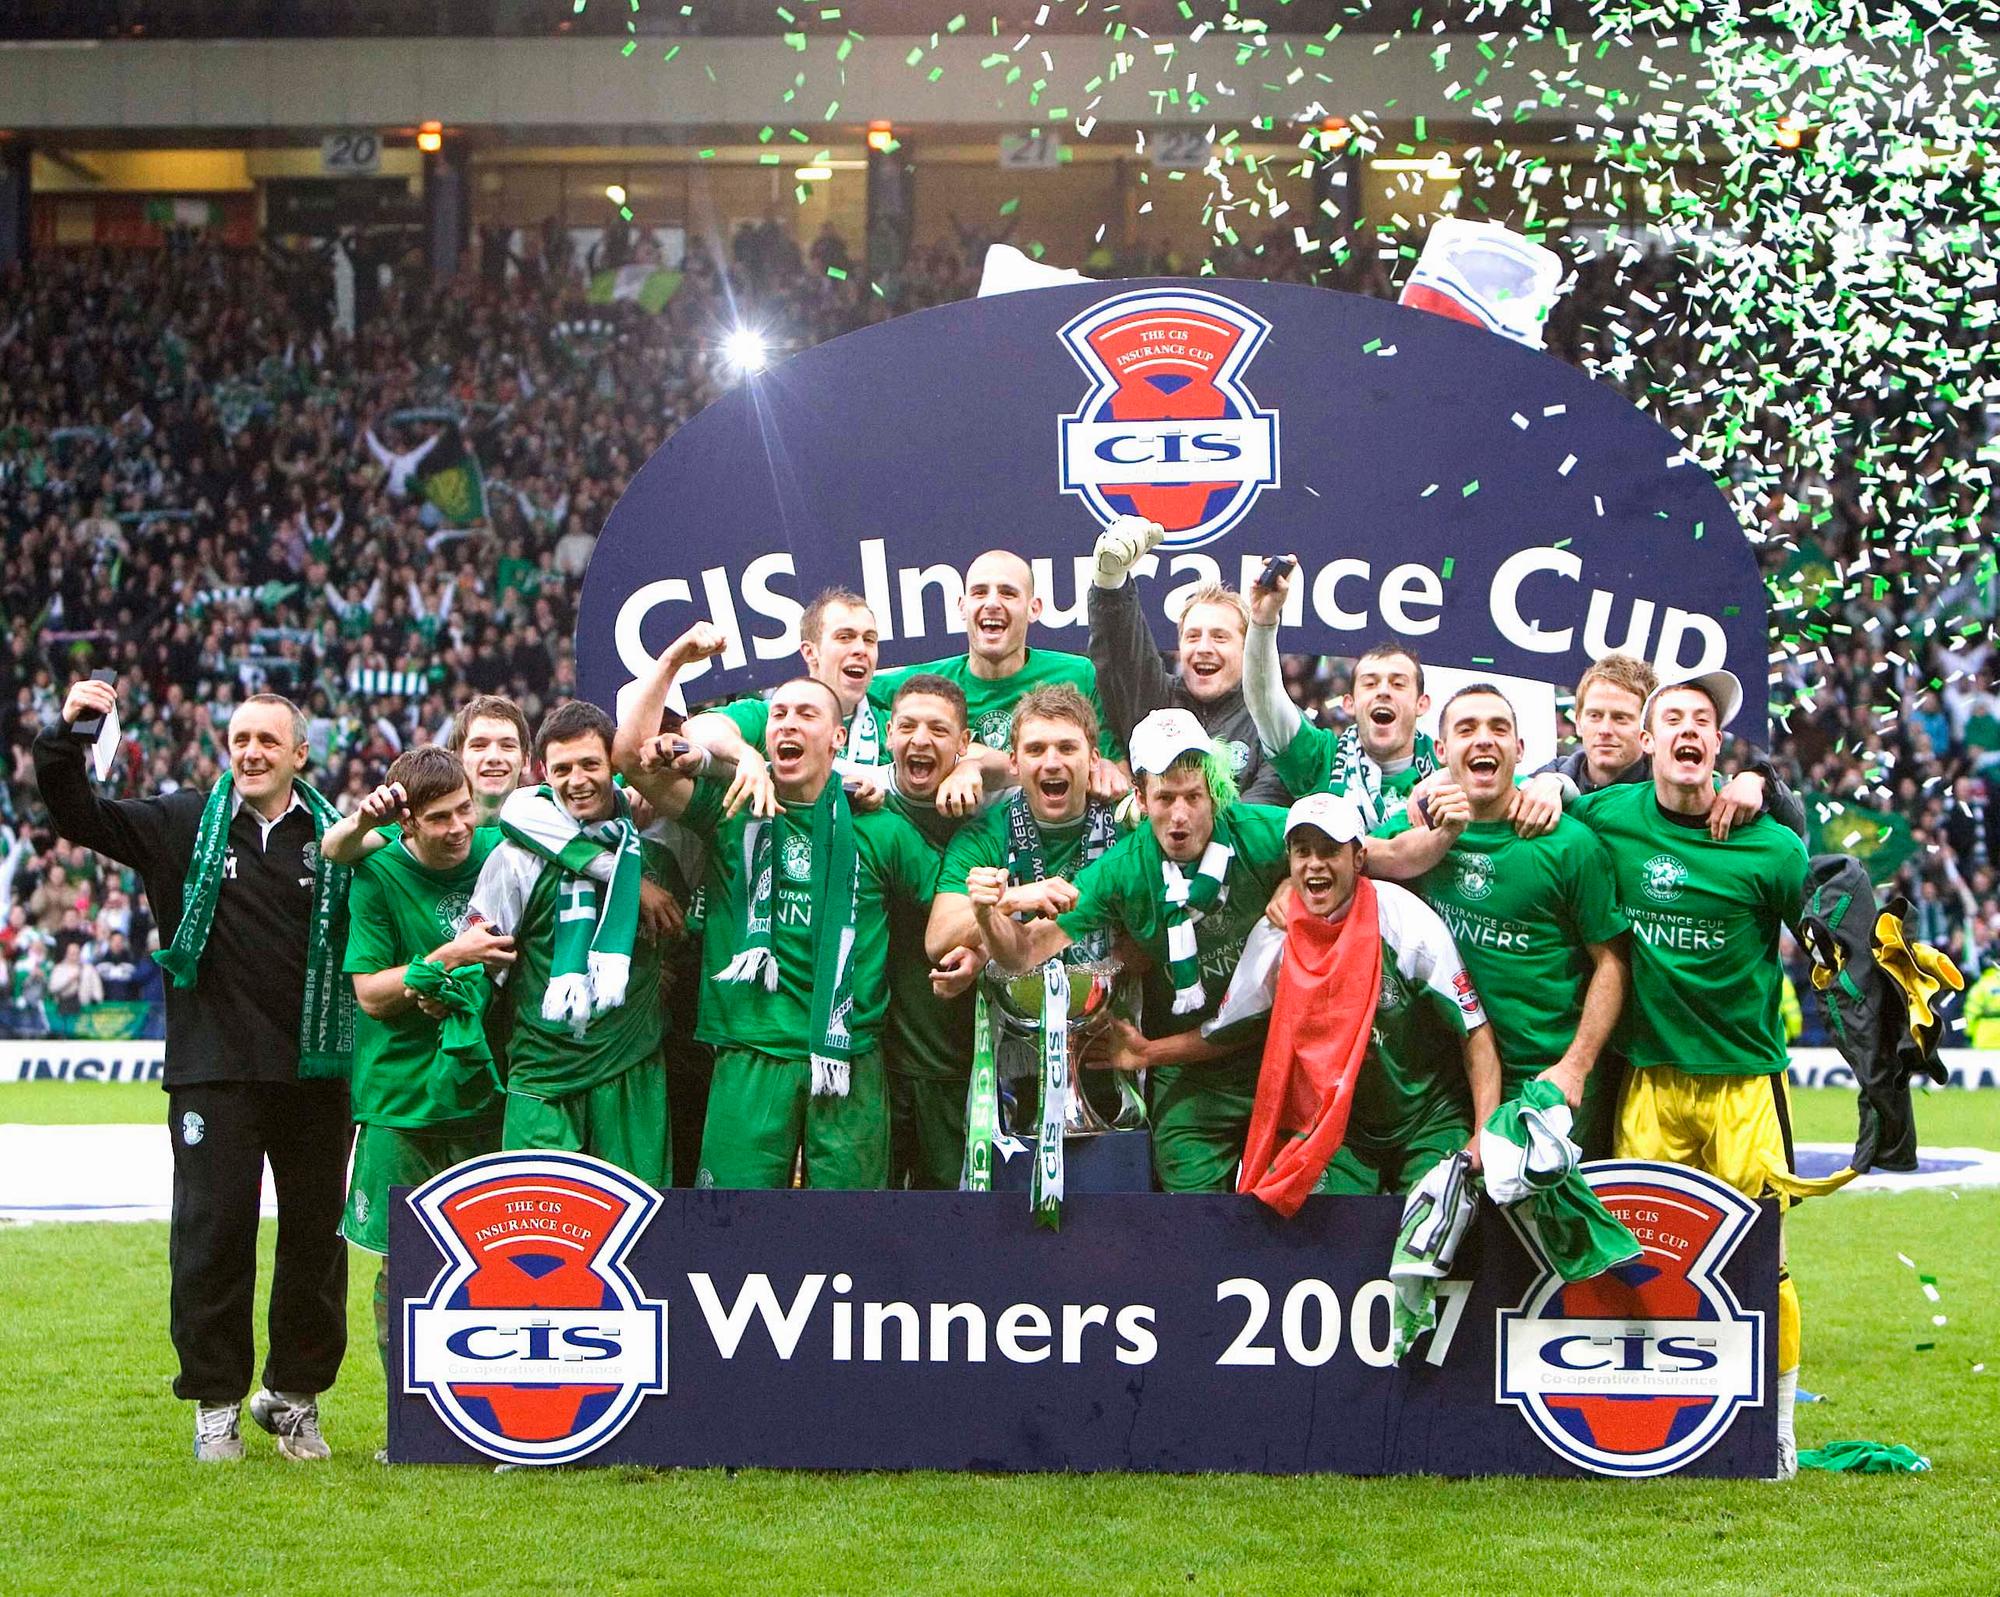 Where are they now? The Hibs team that defeated Kilmarnock in the 2007